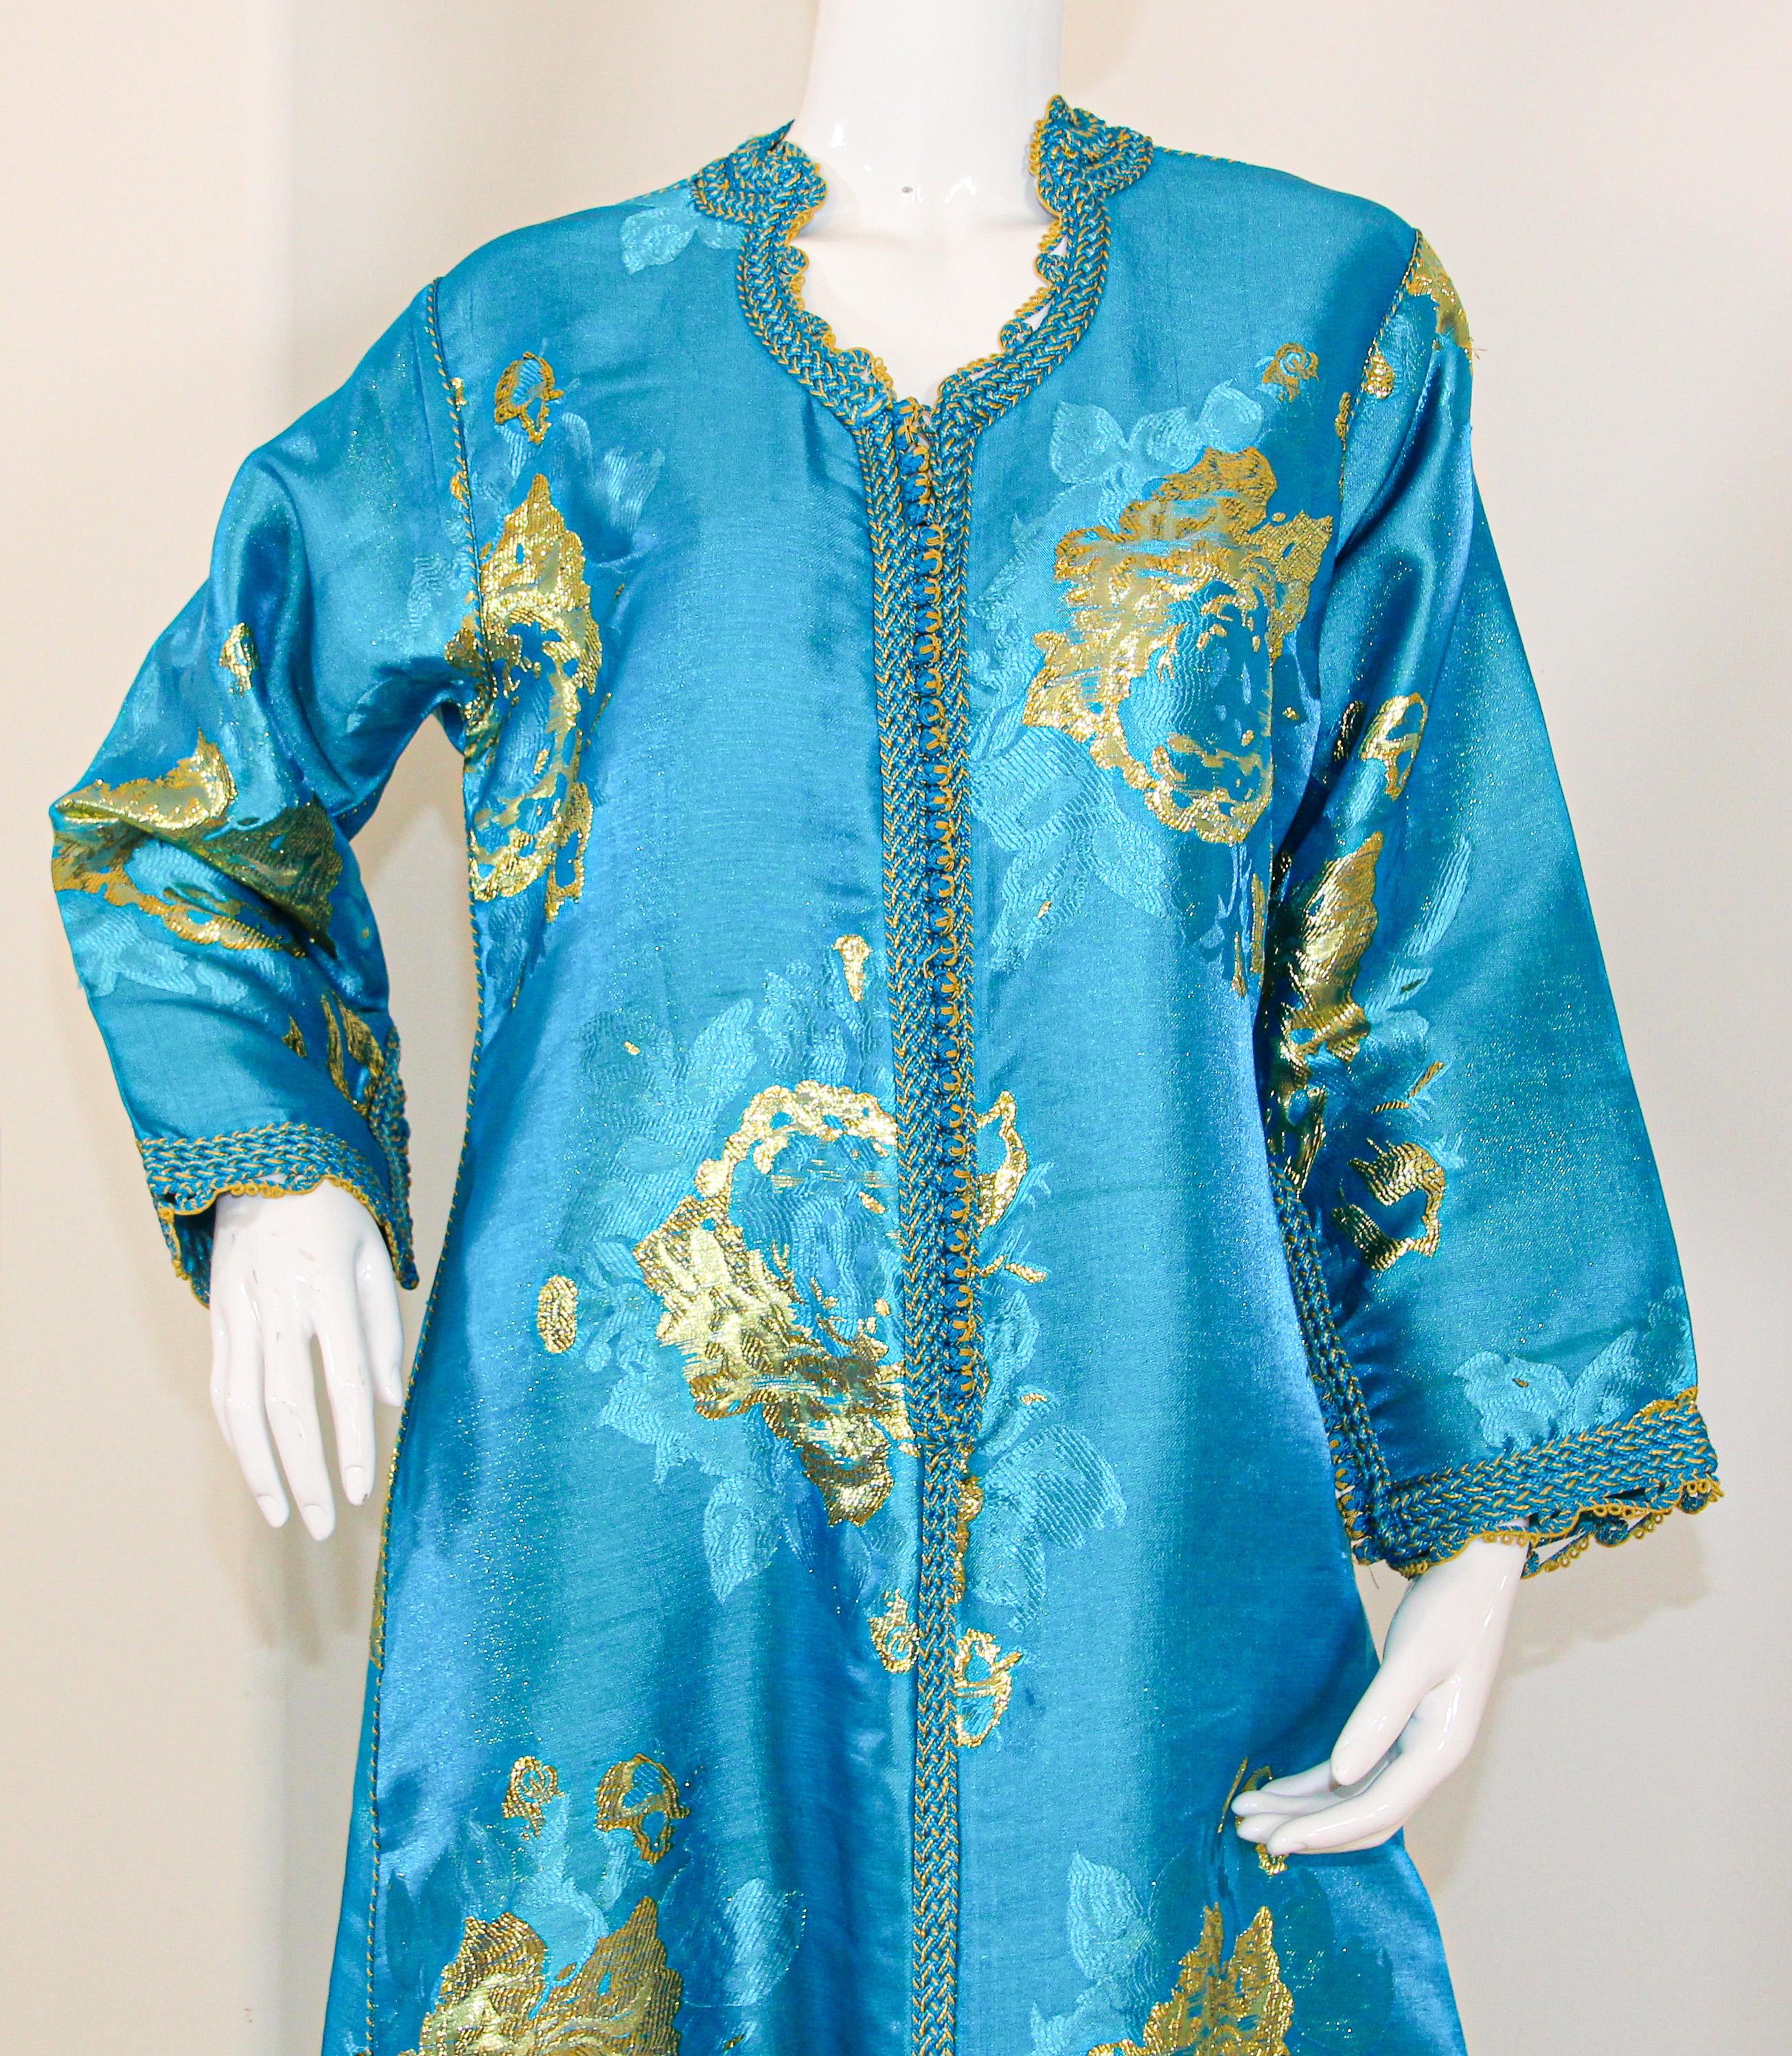 Moroccan Vintage Kaftan in Turquoise and Gold Floral Brocade Metallic Lame 10